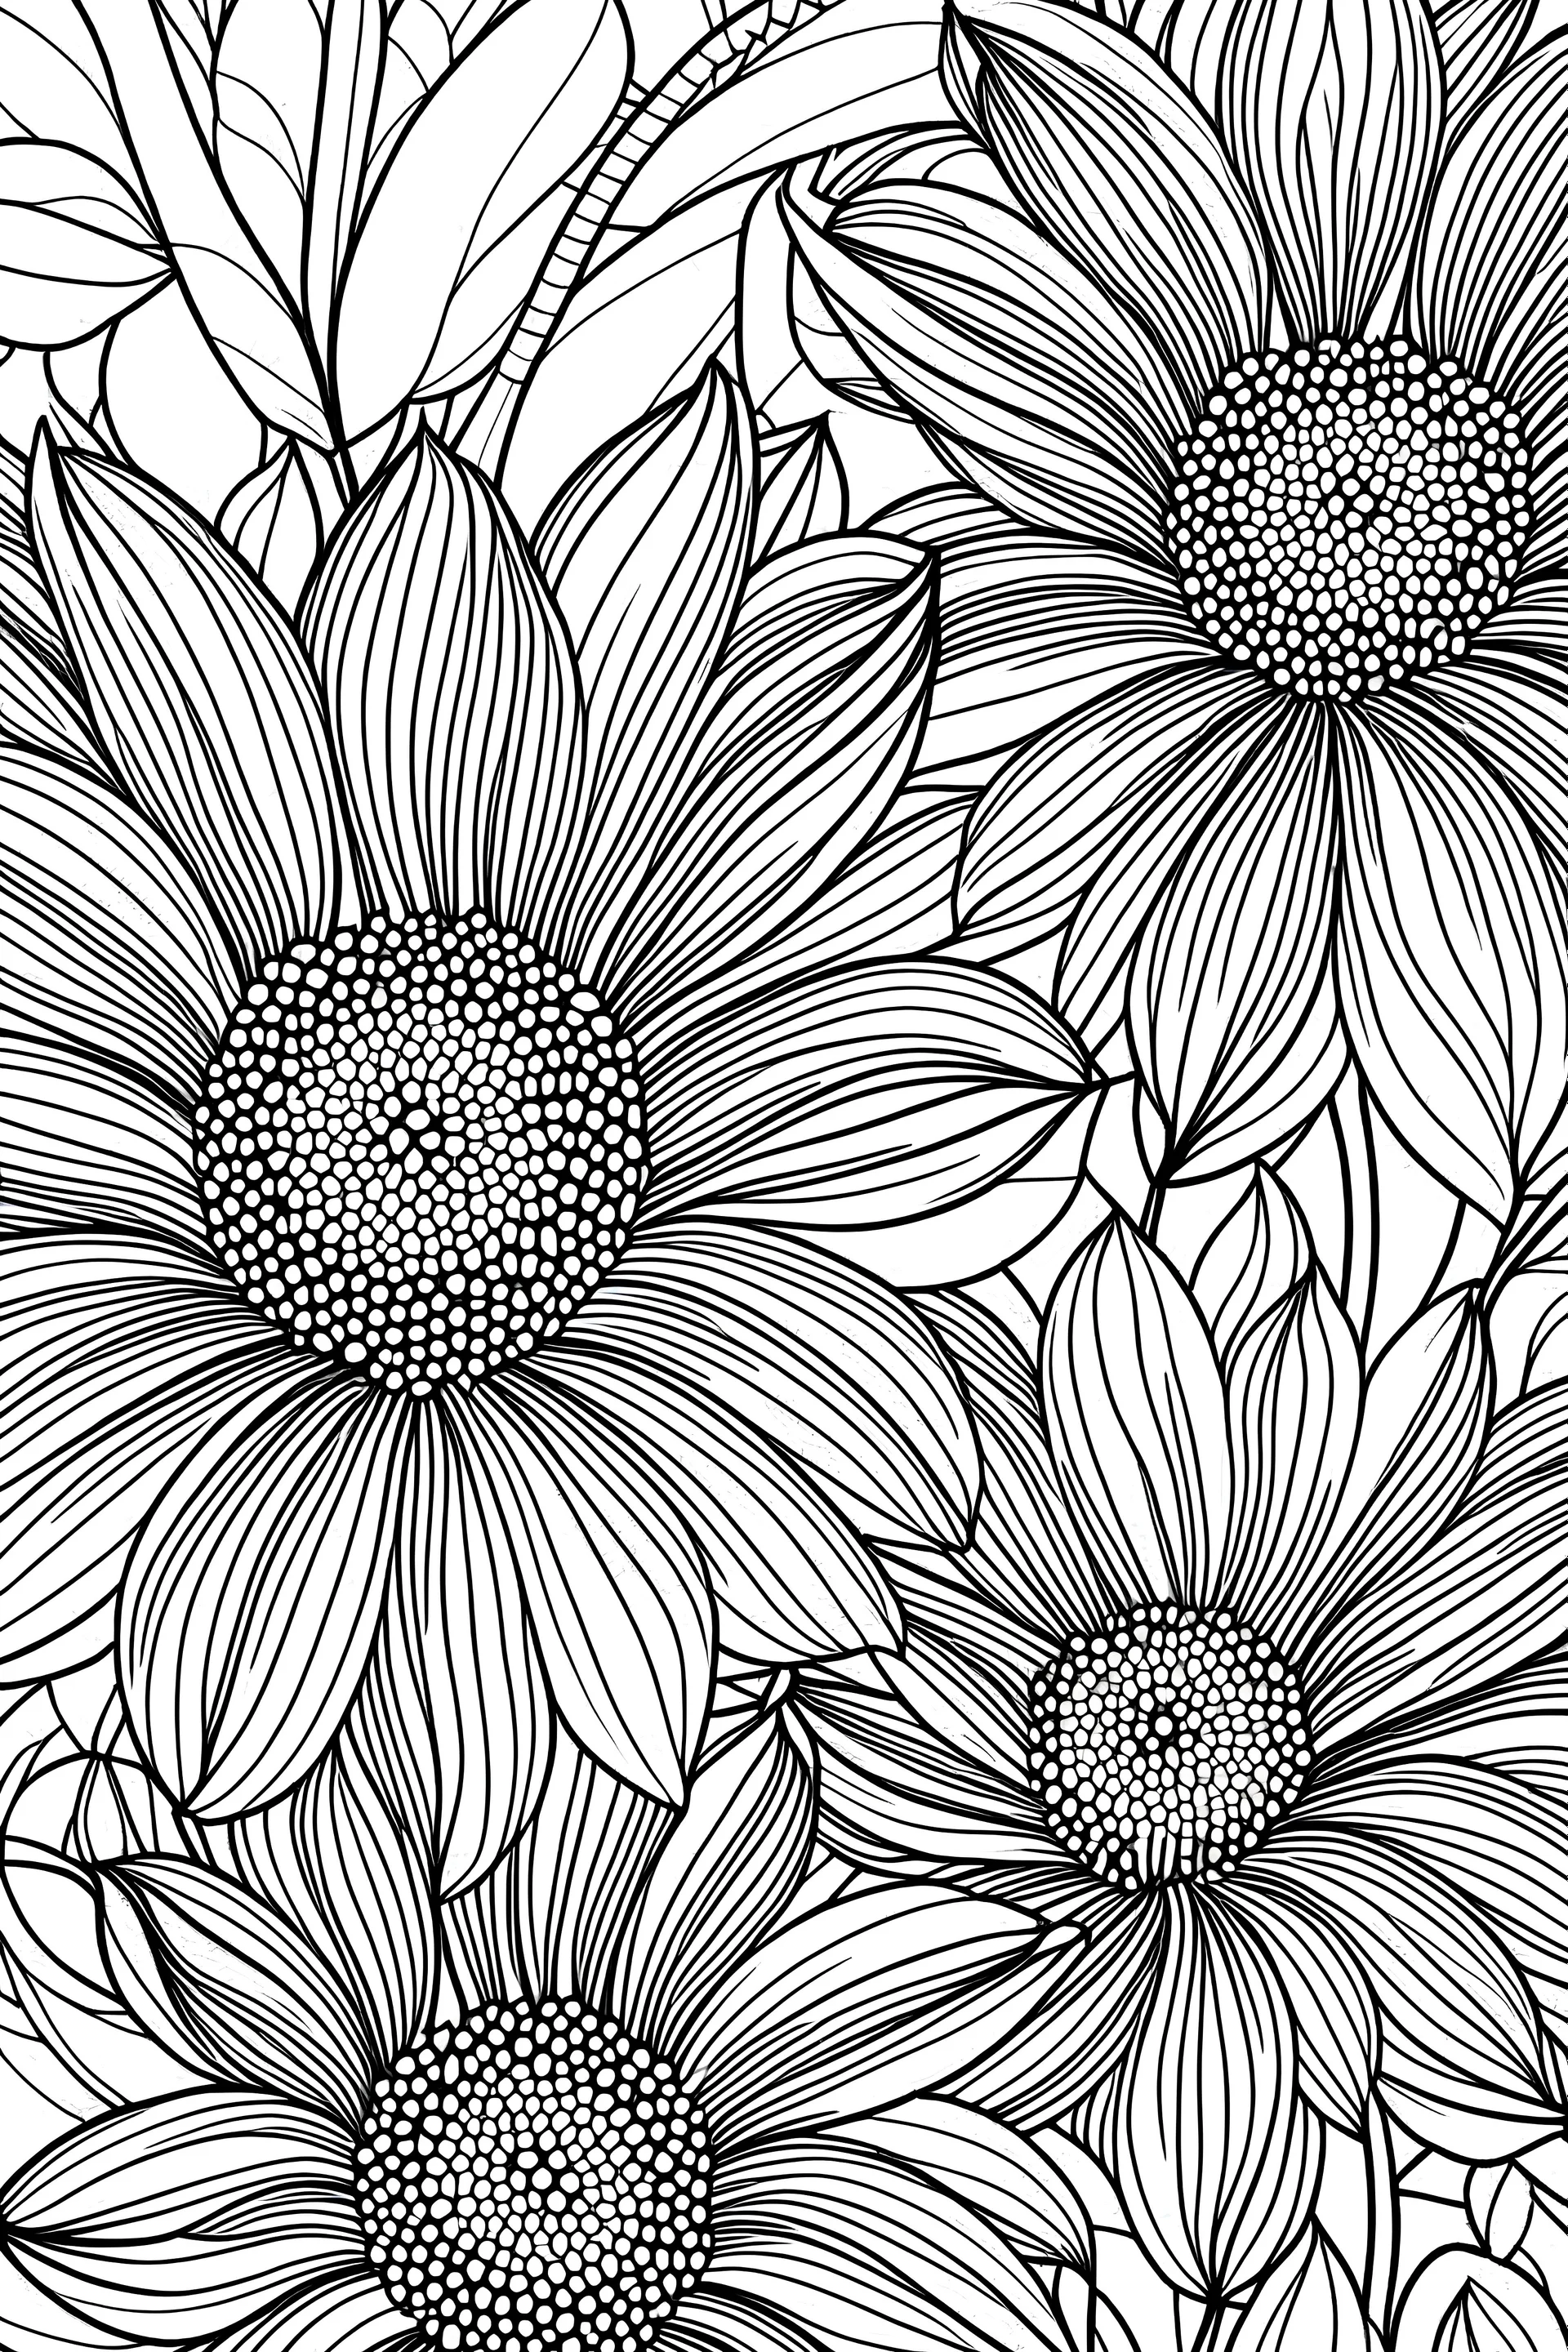 Intricately detailed flowers with large petals for easy coloring. for kids coloring page,no greyscale , there should be enough space for coloring, no colored areas, no detailed page, simple page with one image, bold lines, all on a white background